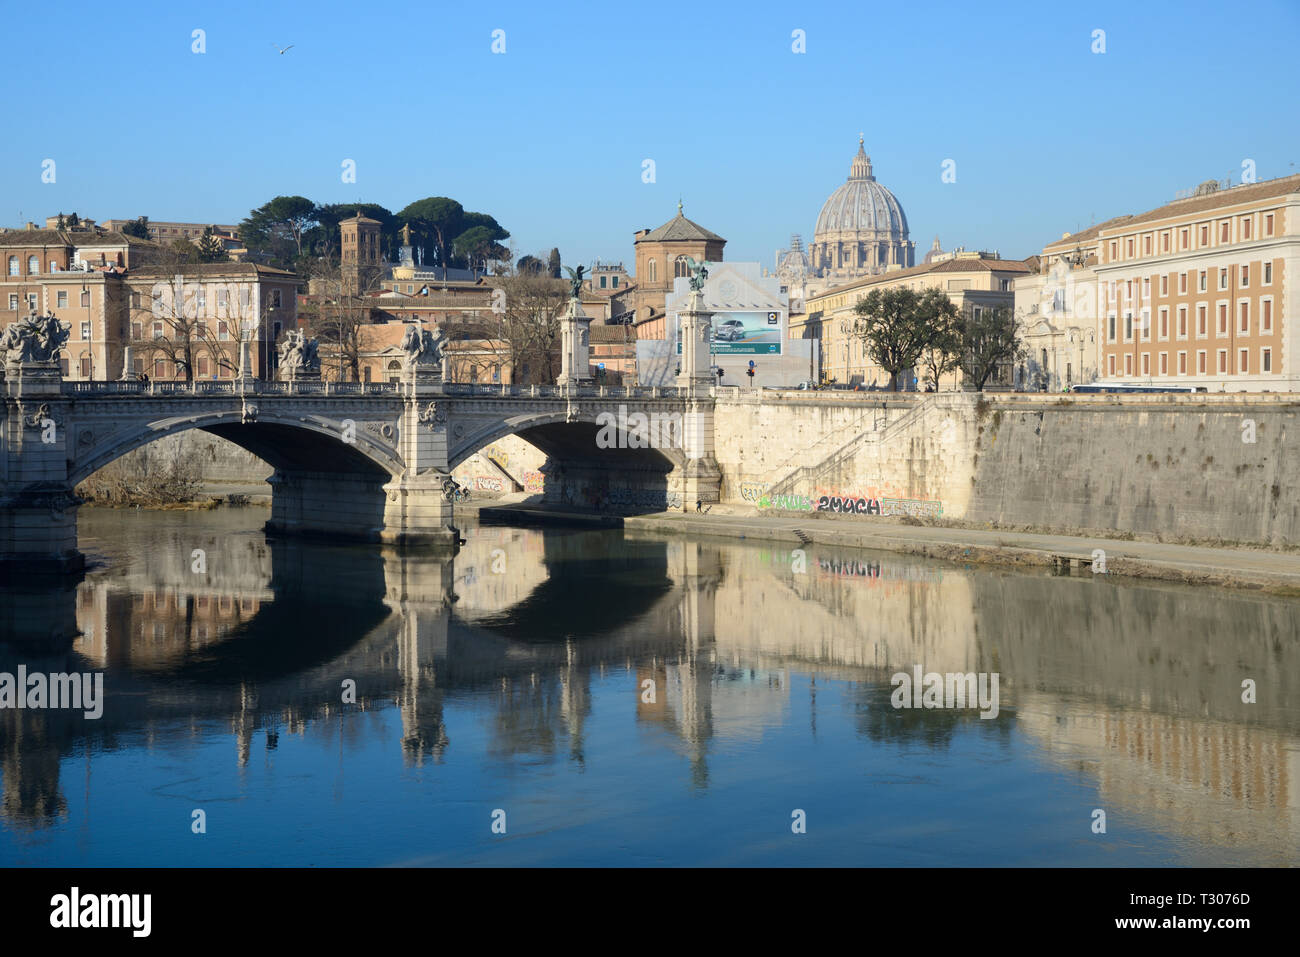 Ponte Vittorio Emanuele II Bridge, River Tiber and Townscape of Rome with Dome of Saint Peter's Basilica Rome Italy Stock Photo